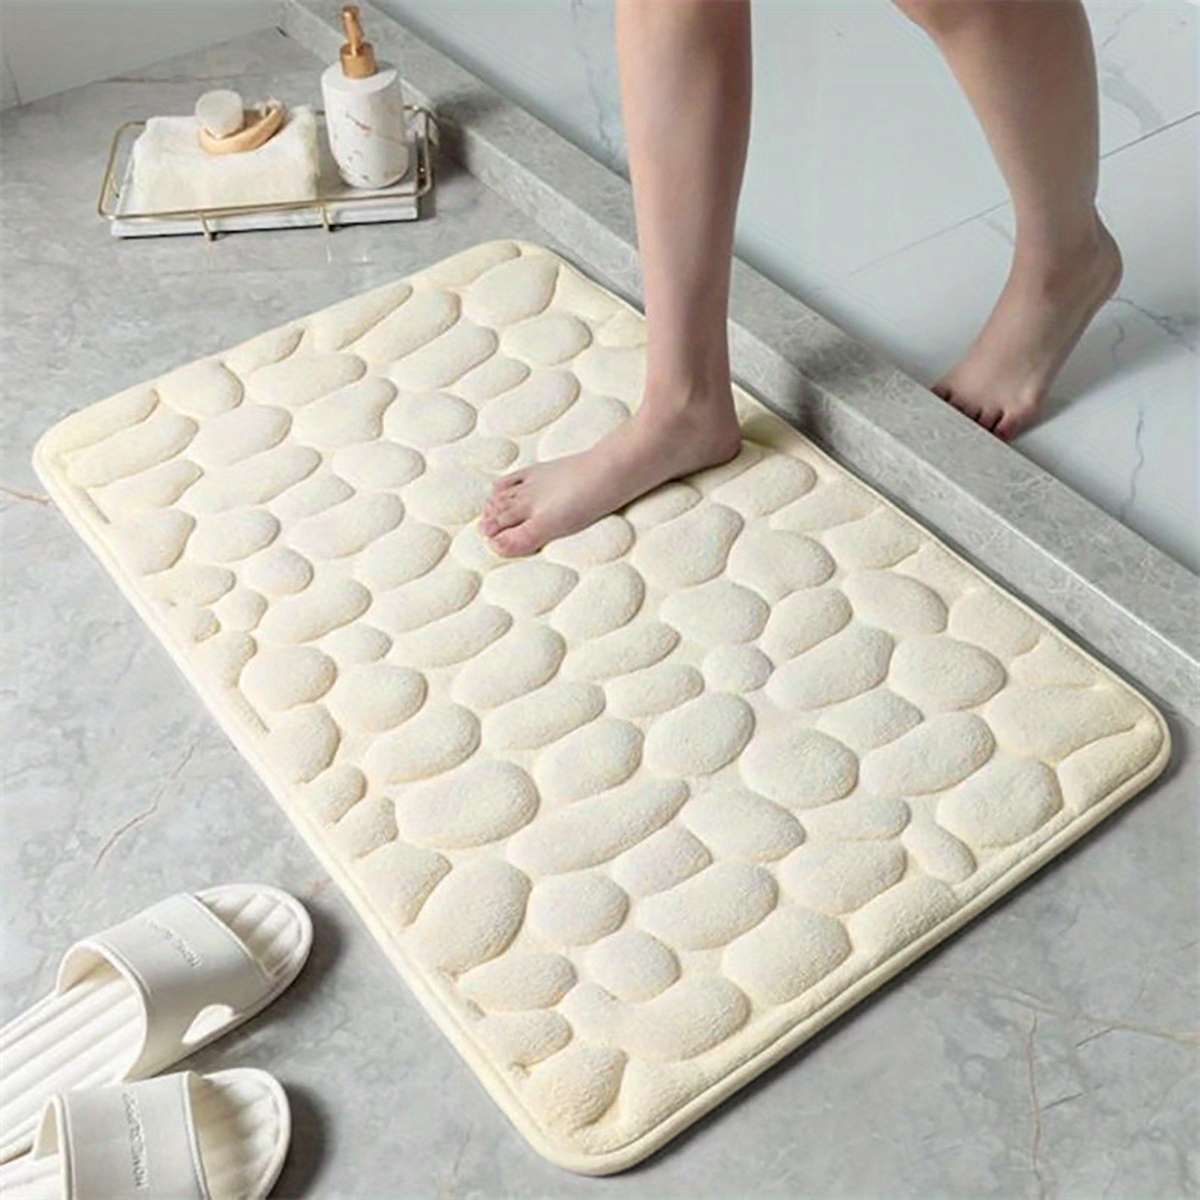 3D Printed Sole Cobblestone Ultra Thin Rubber Mat Floor for